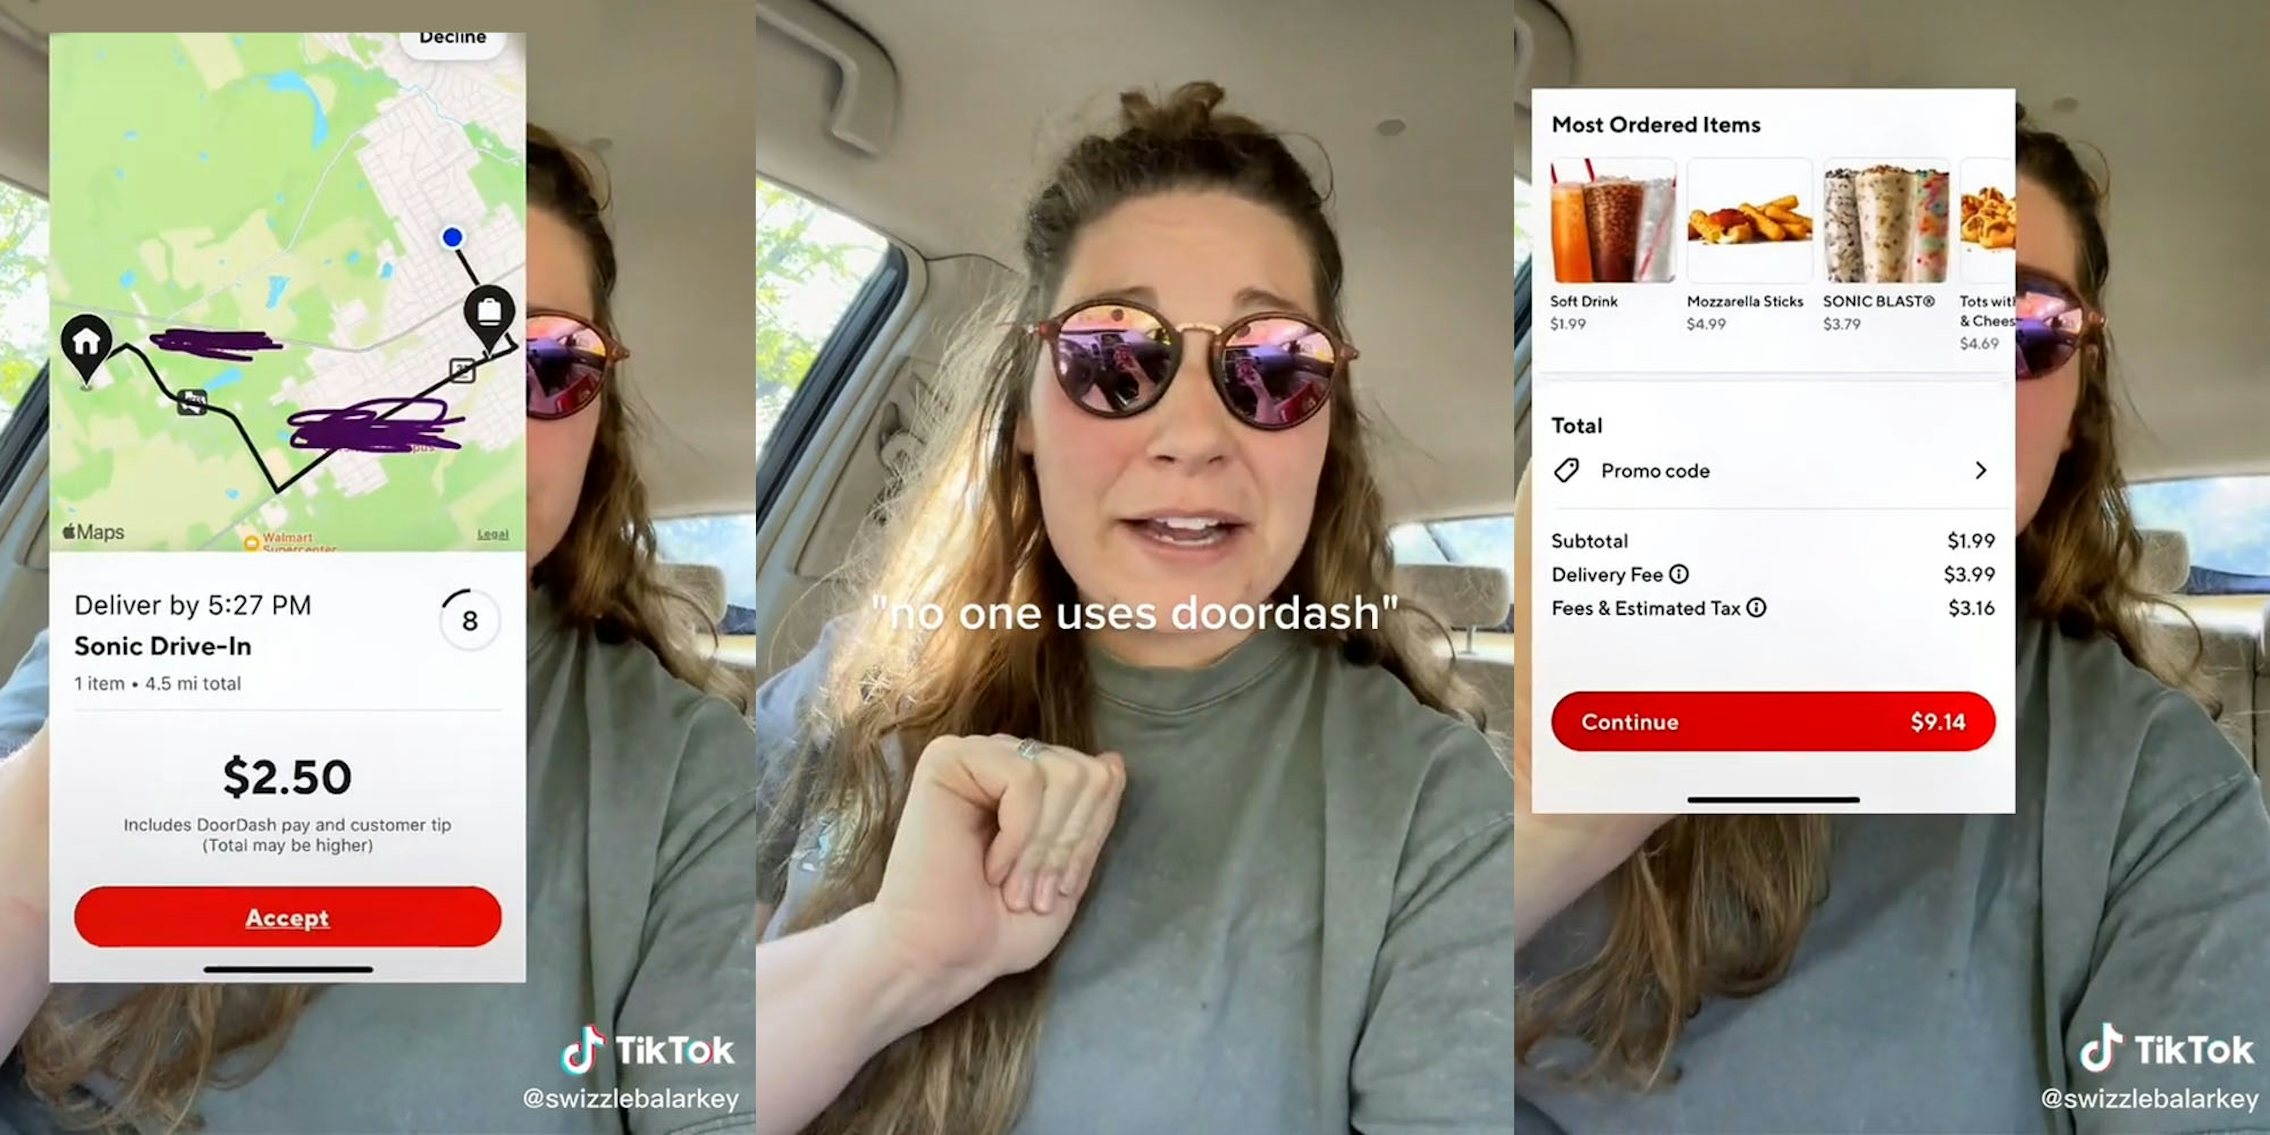 Woman in car tiktok greenscreen doordash order screenshot in front captions 'Sonic Drive-In $2.50 Accept' (L) woman in car talking caption ''no one uses doordash'' (c) Woman in car greenscreen tiktok of Sonic order caption 'Most ordered items Total subtotal $1.99 Delivery fee $3.99 Fees & estimated tax $3.16 Continue $9.14' (r)